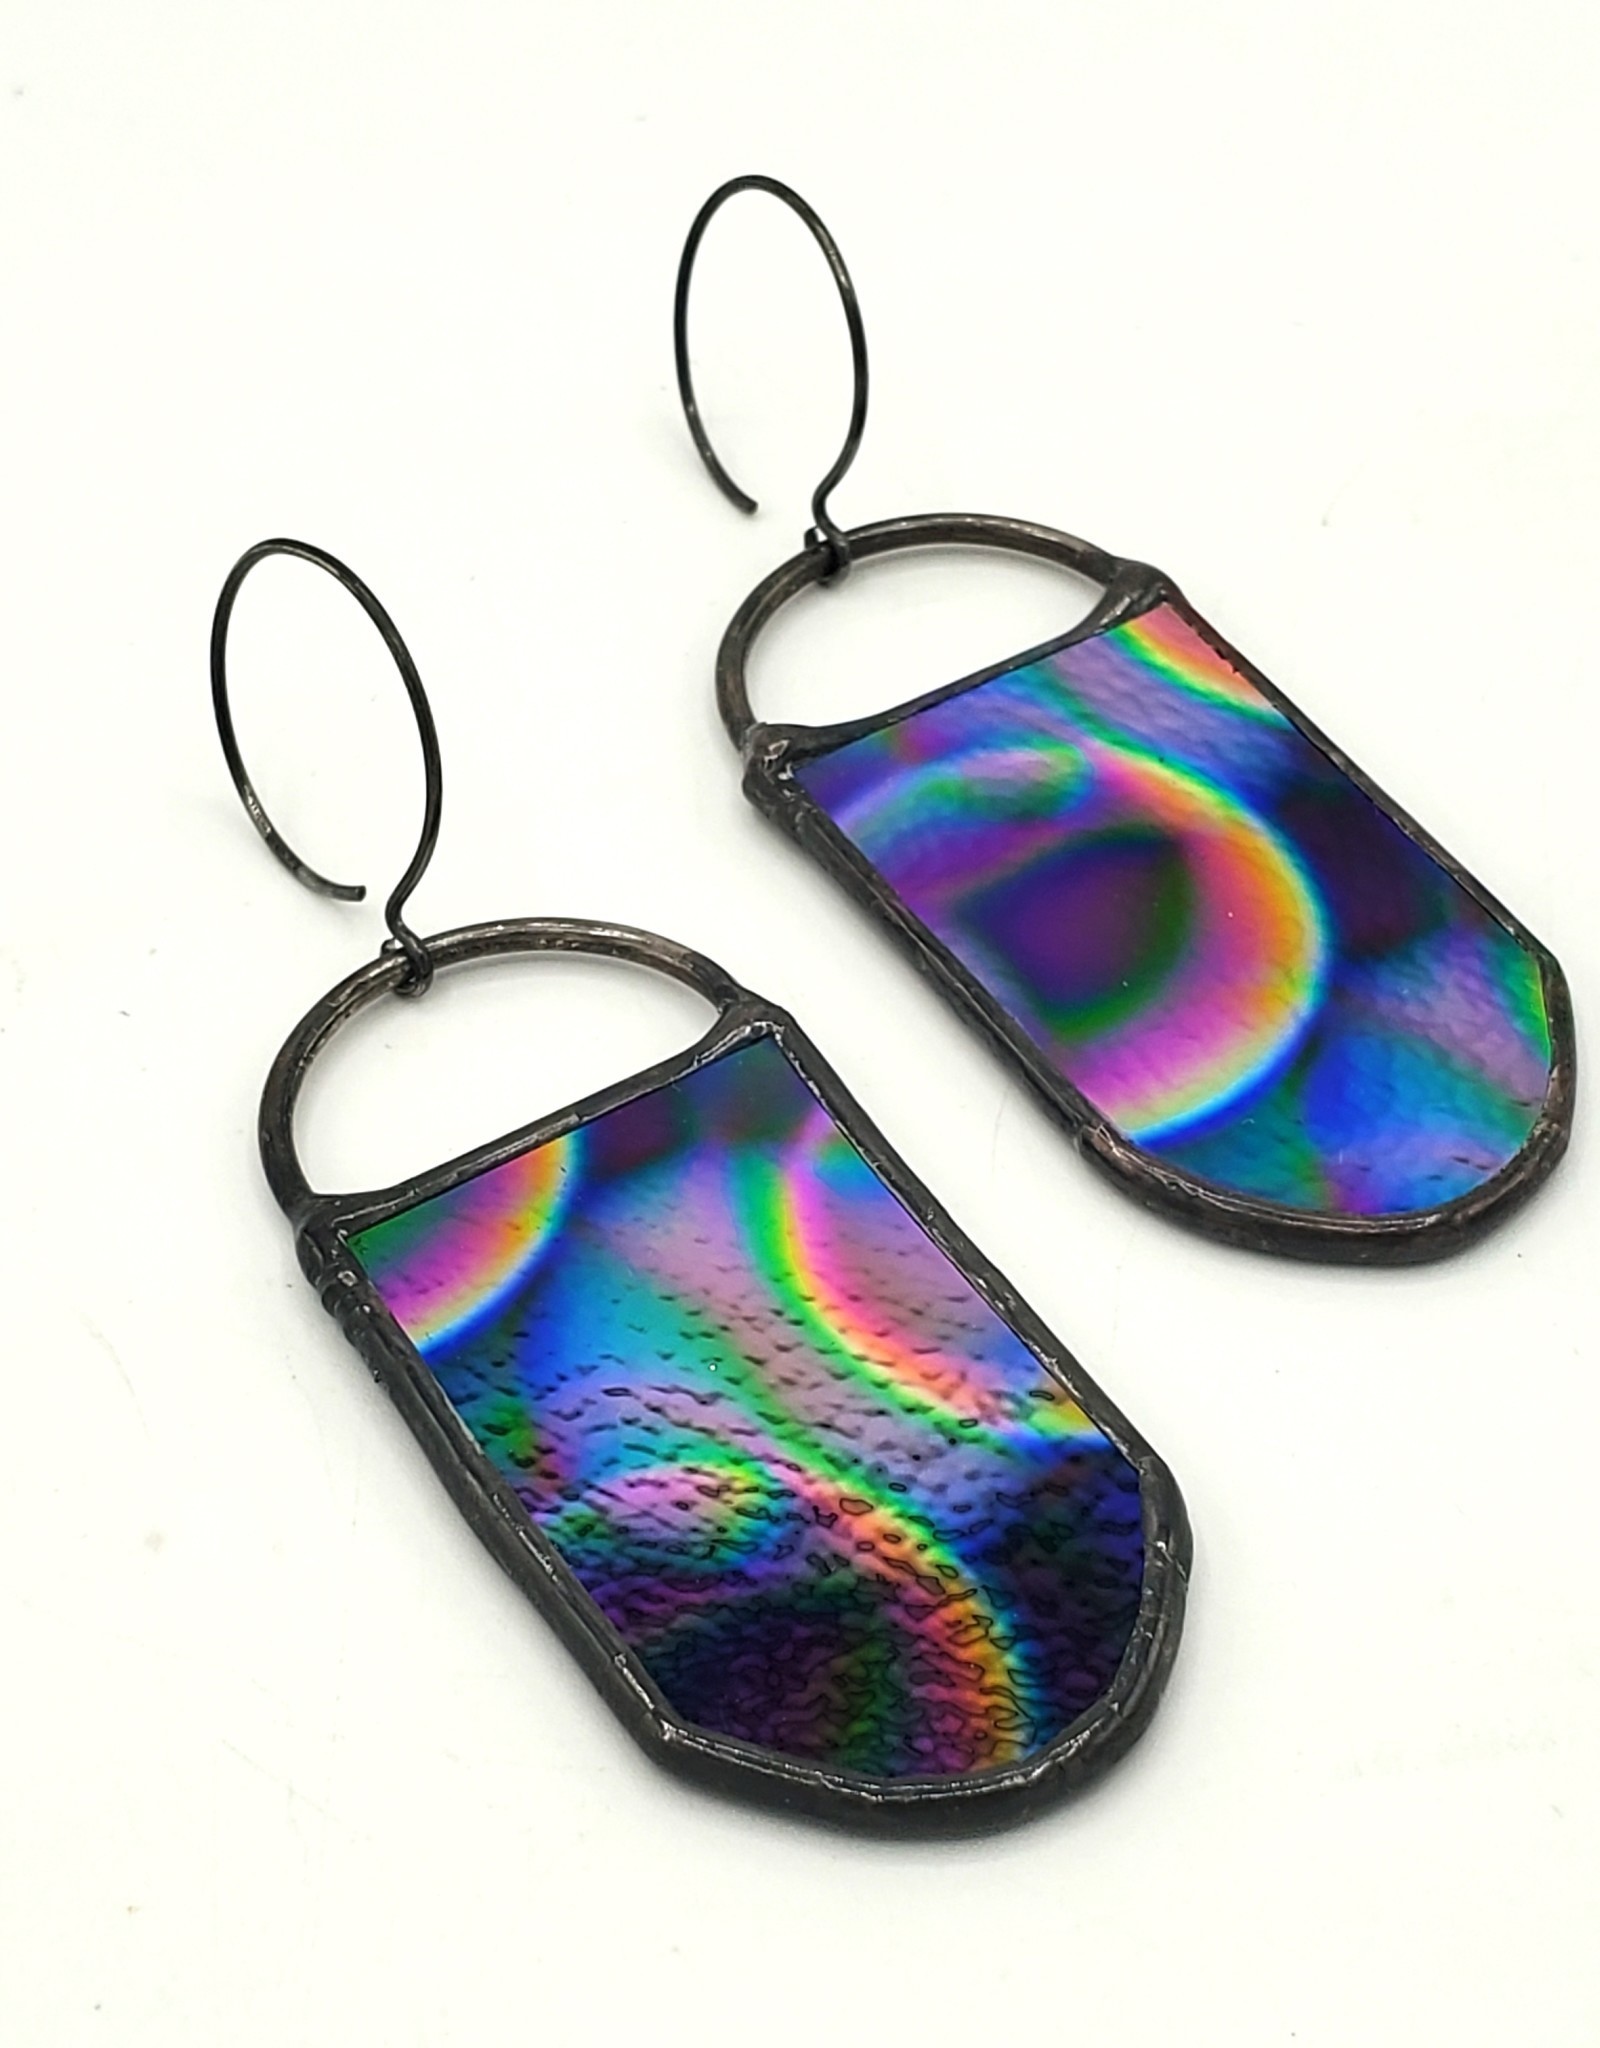 Redux Multi-colored Mirrored Dichroic Stained Glass Tongue Earrings, Lead-free